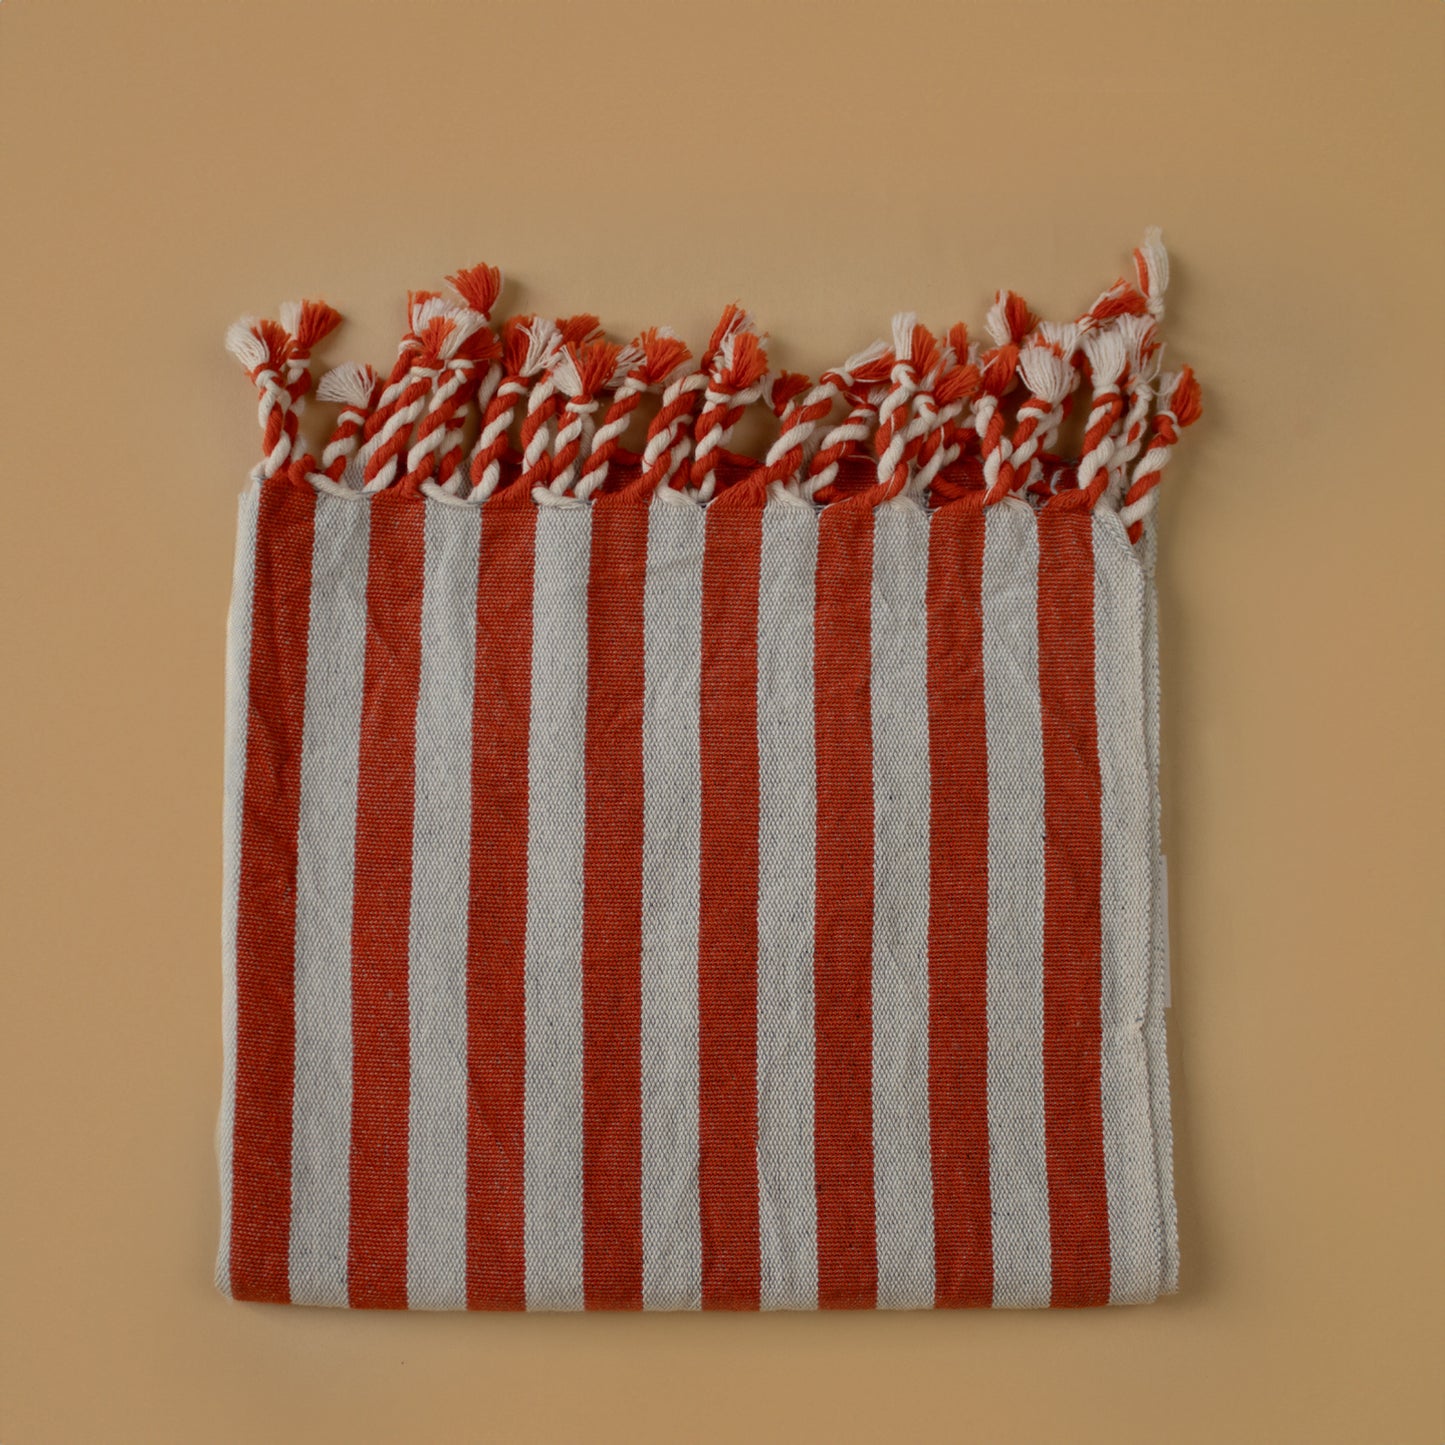 Small Handwoven Hand Towel - Red Stripes